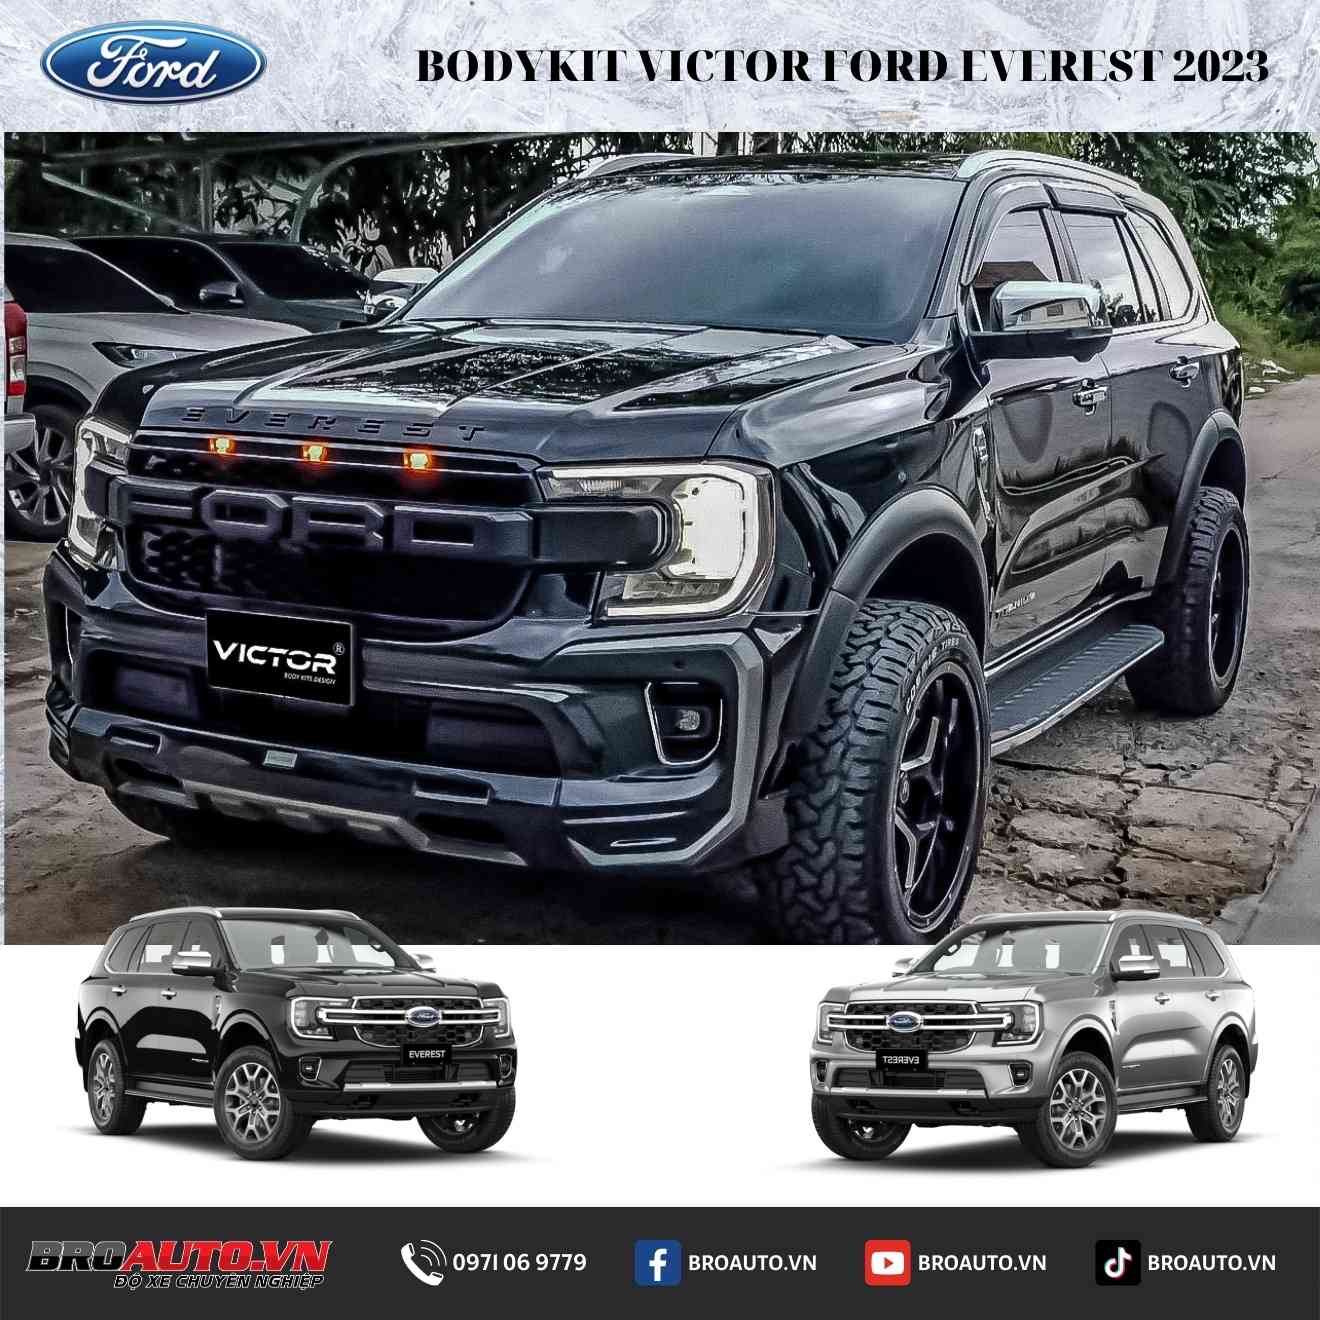 BODYKIT VICTOR CHO FORD EVEREST 2023